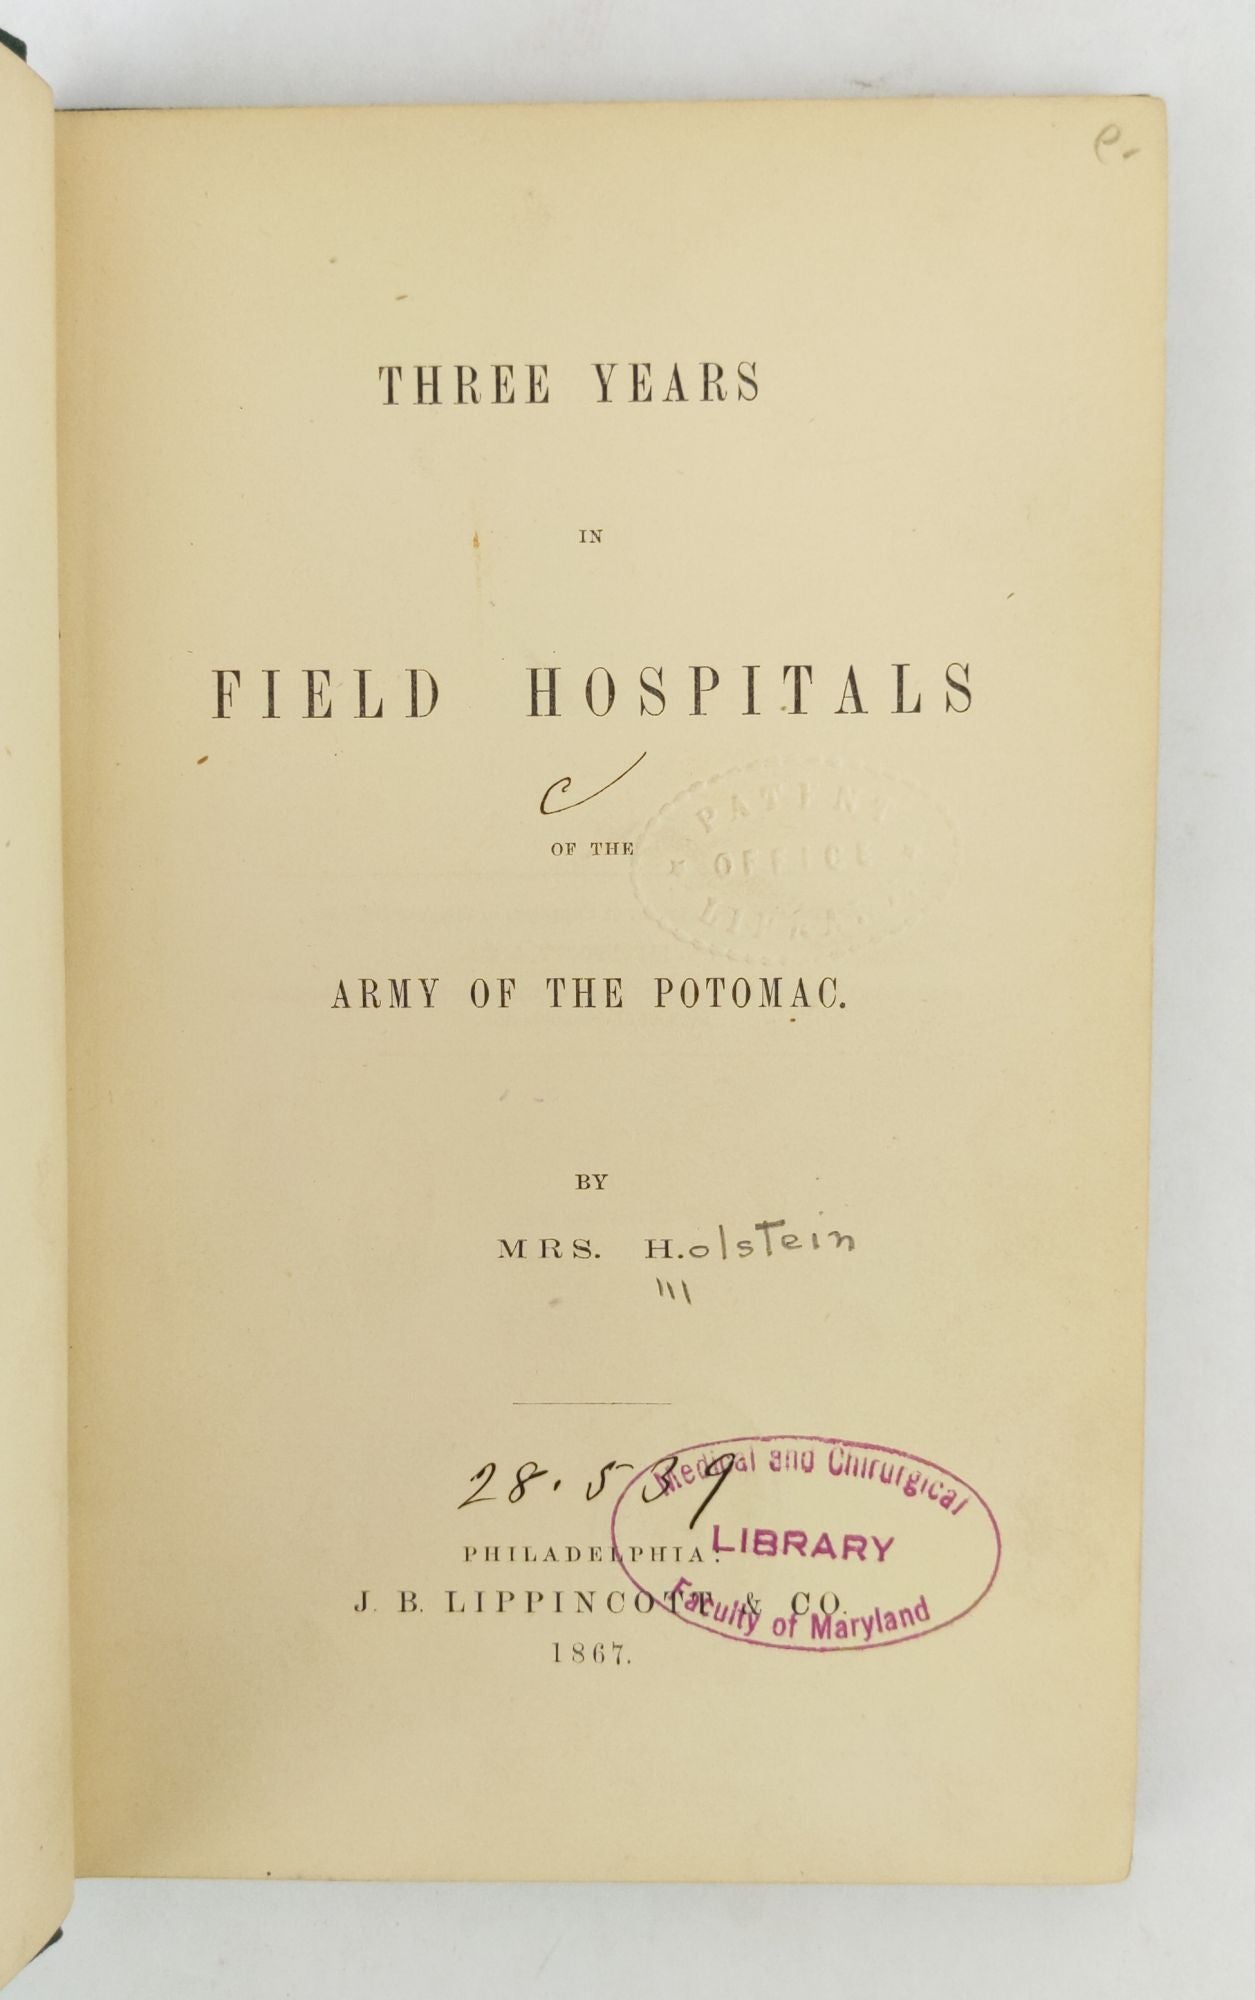 Product Image for THREE YEARS IN FIELD HOSPITALS OF THE ARMY OF THE POTOMAC BY MRS. H.